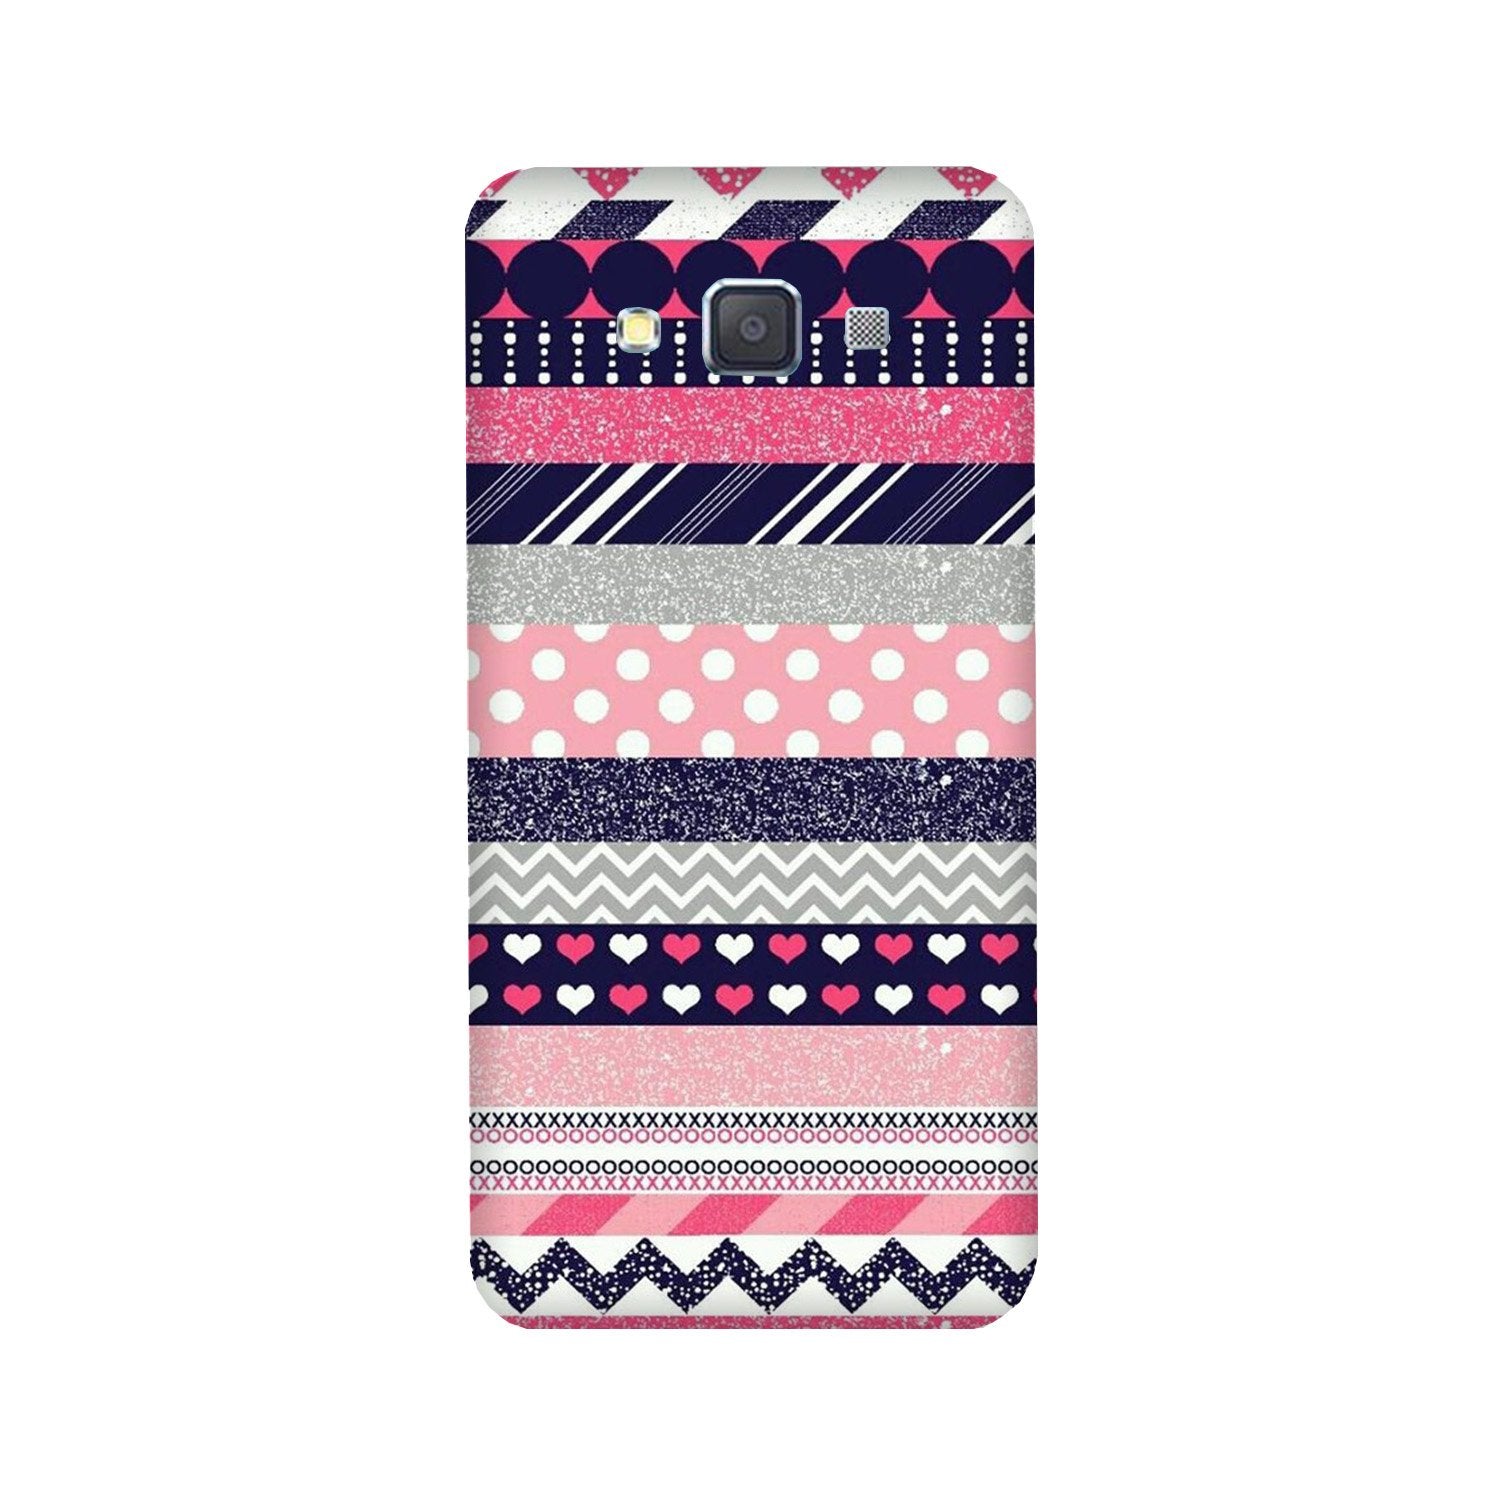 Pattern3 Case for Galaxy ON7/ON7 Pro